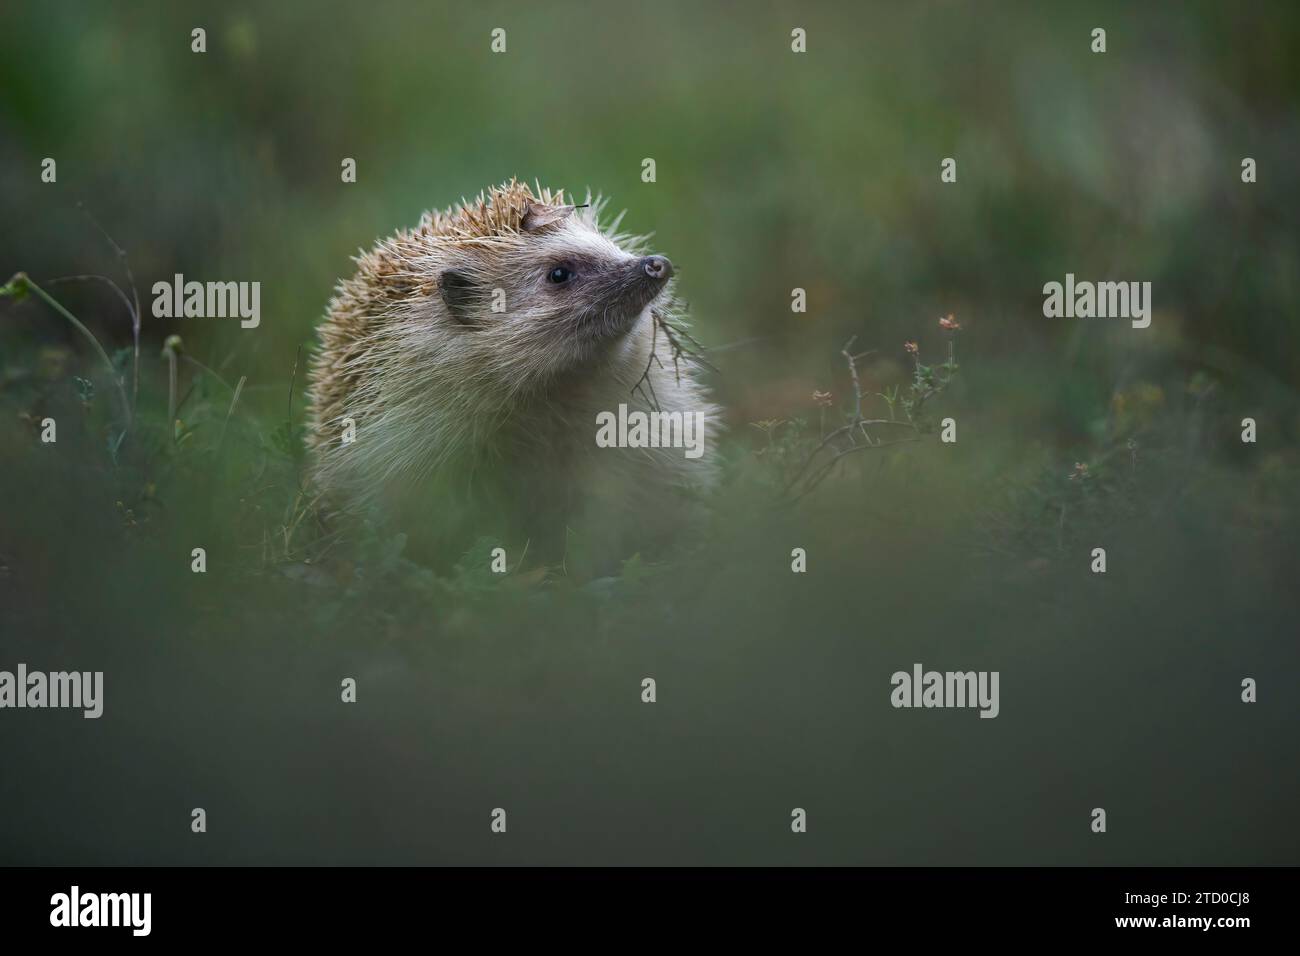 A North African Hedgehog peers out from lush greenery in a natural habitat Stock Photo